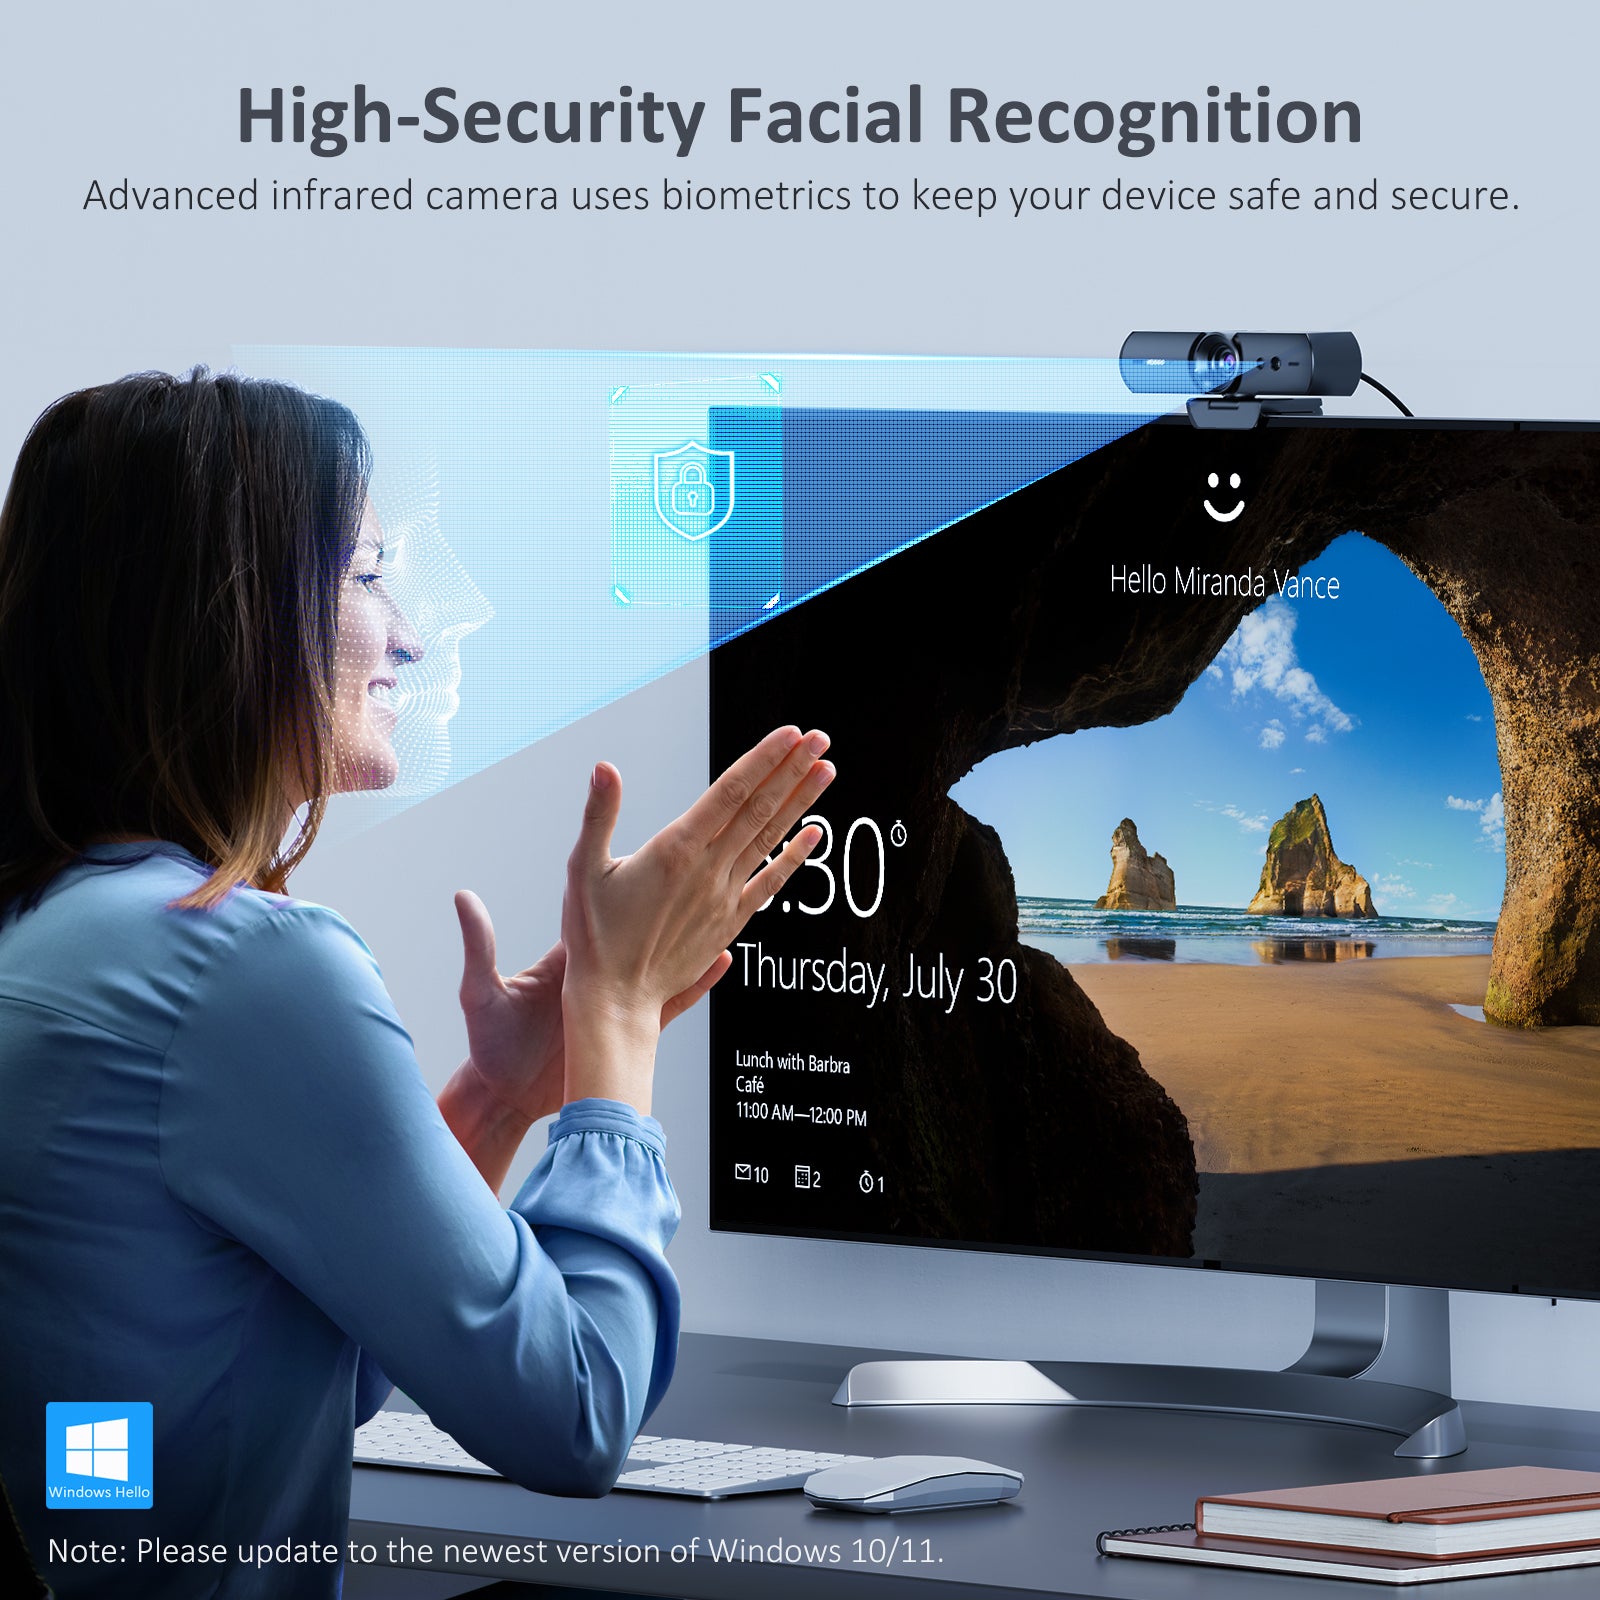 Compatible with Windows Hello for Win 10/11, enabling quick computer unlock with facialrecognition.